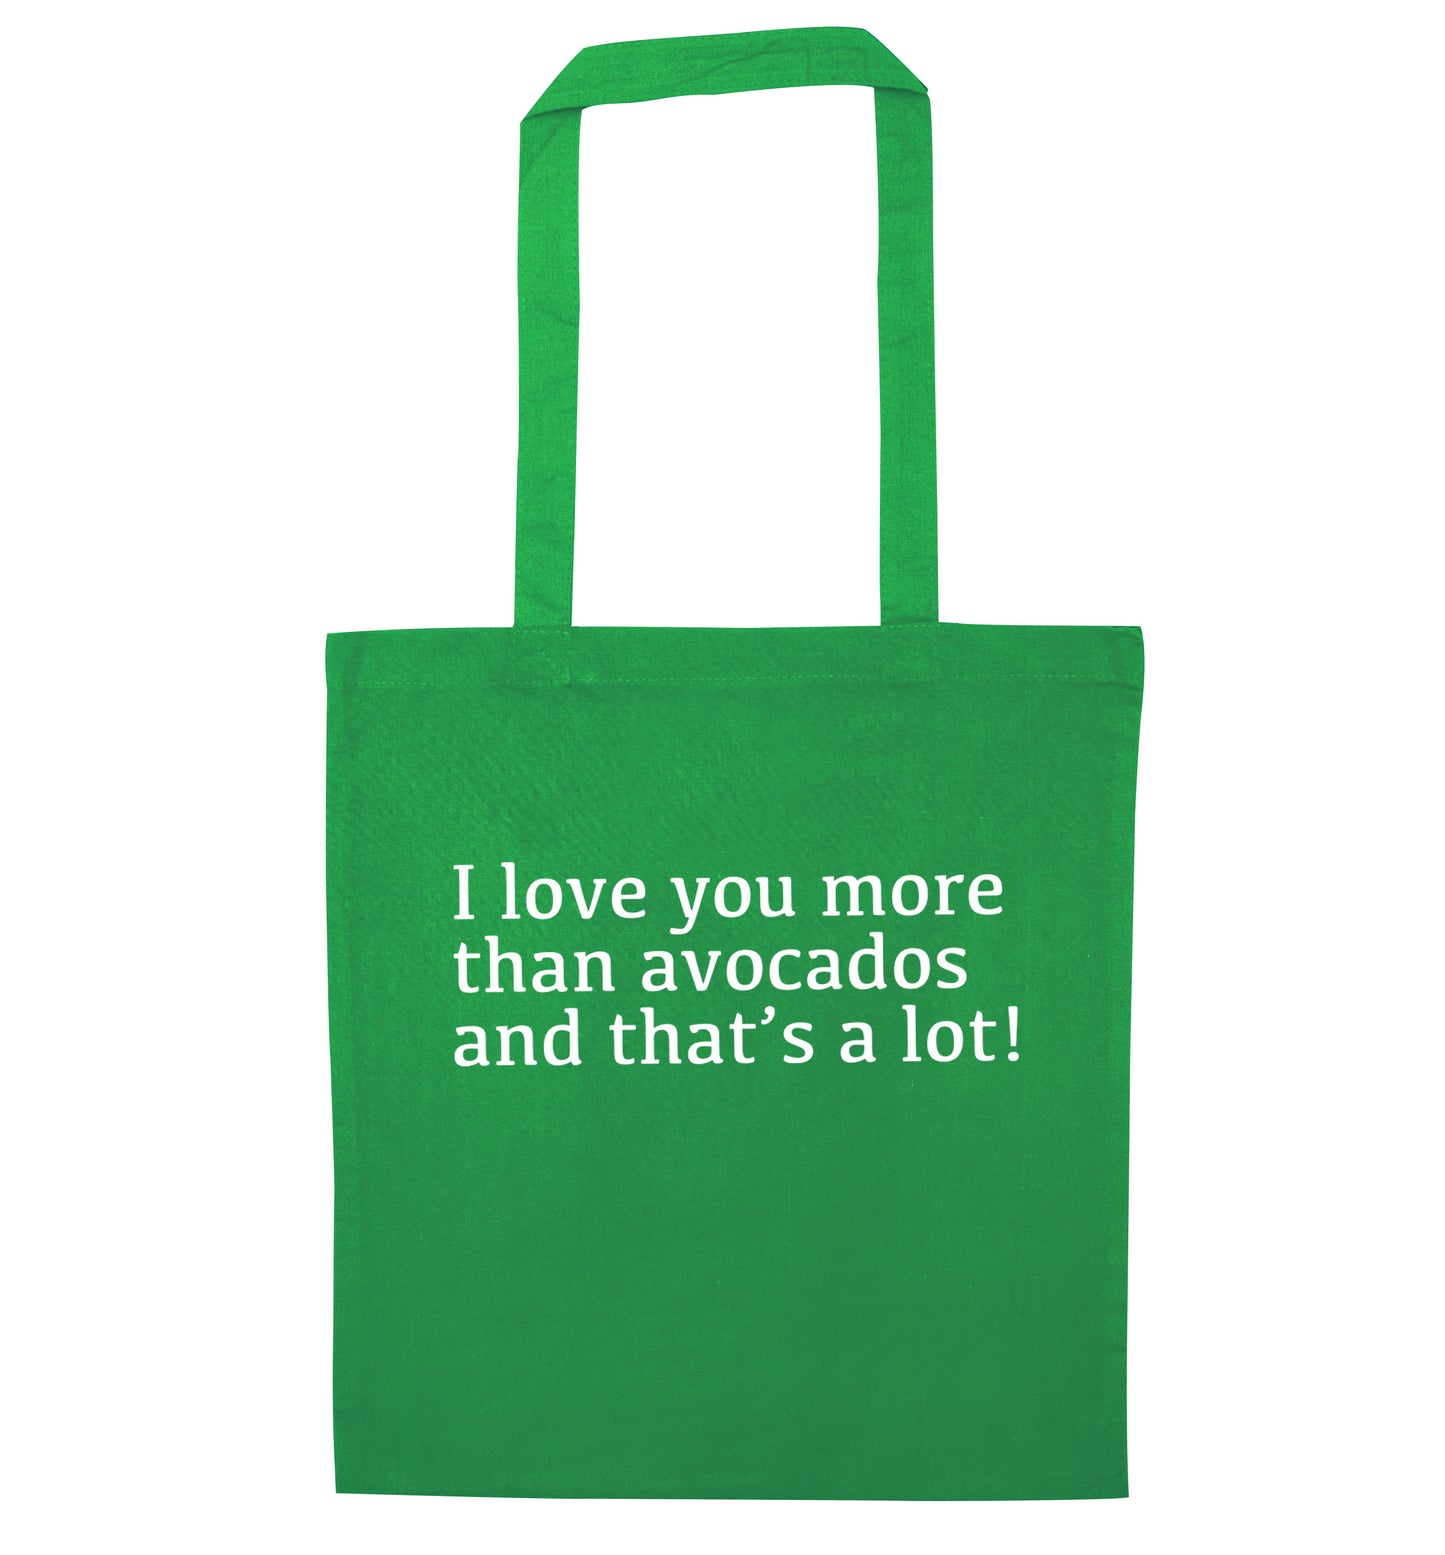 I love you more than avocados and that's a lot green tote bag